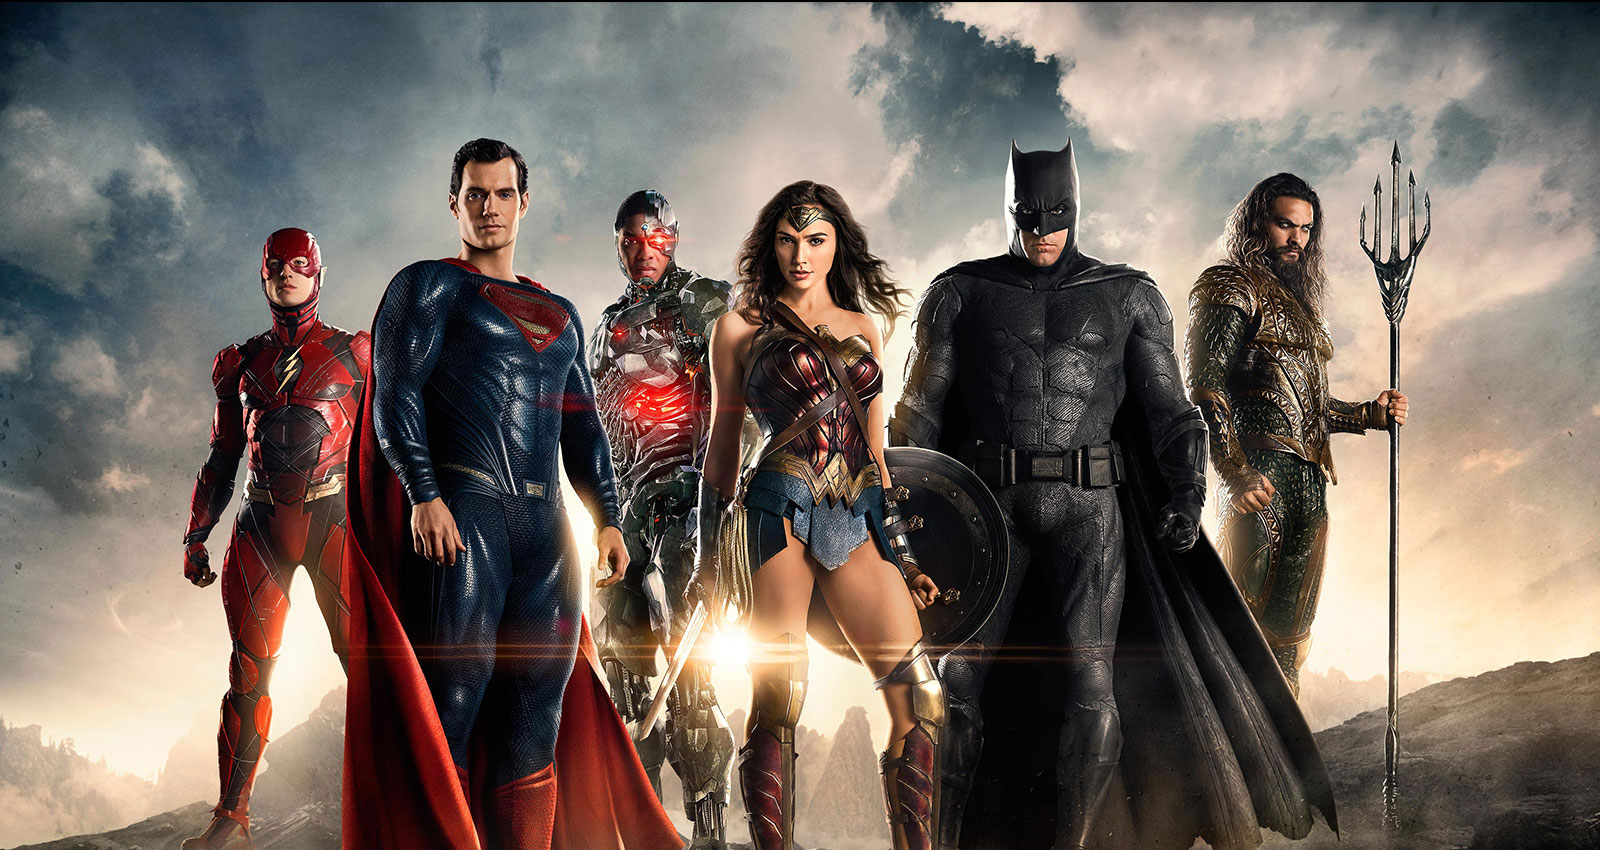 Geek insider, geekinsider, geekinsider. Com,, all in: where to start reading justice league, entertainment